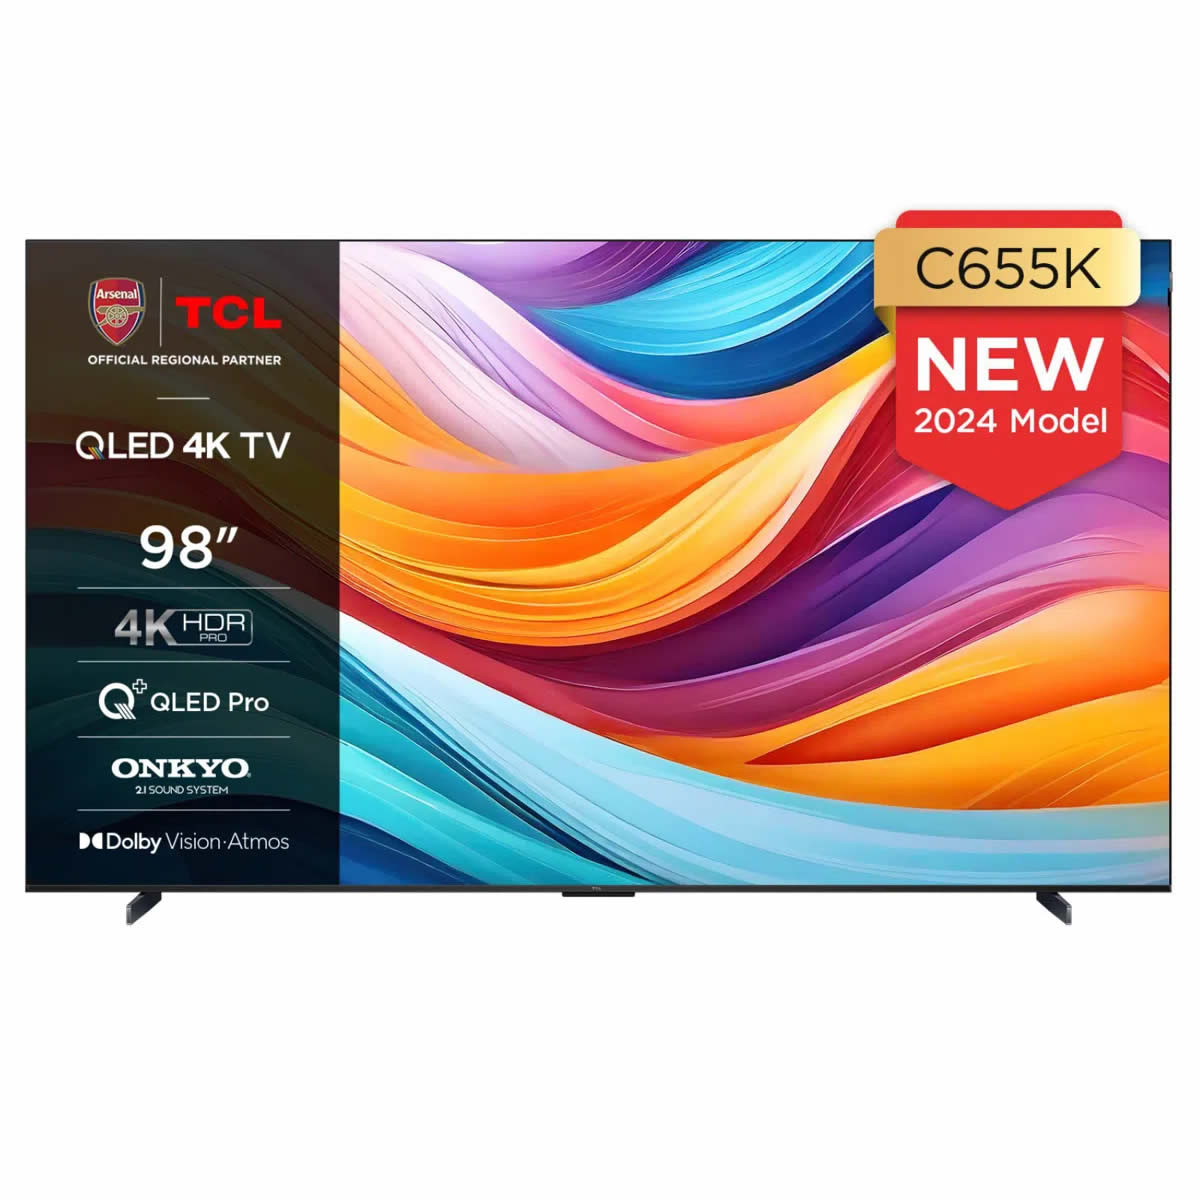 TCL 98inch 4K QLED PRO SMART TV WiFi Freeview HD Google